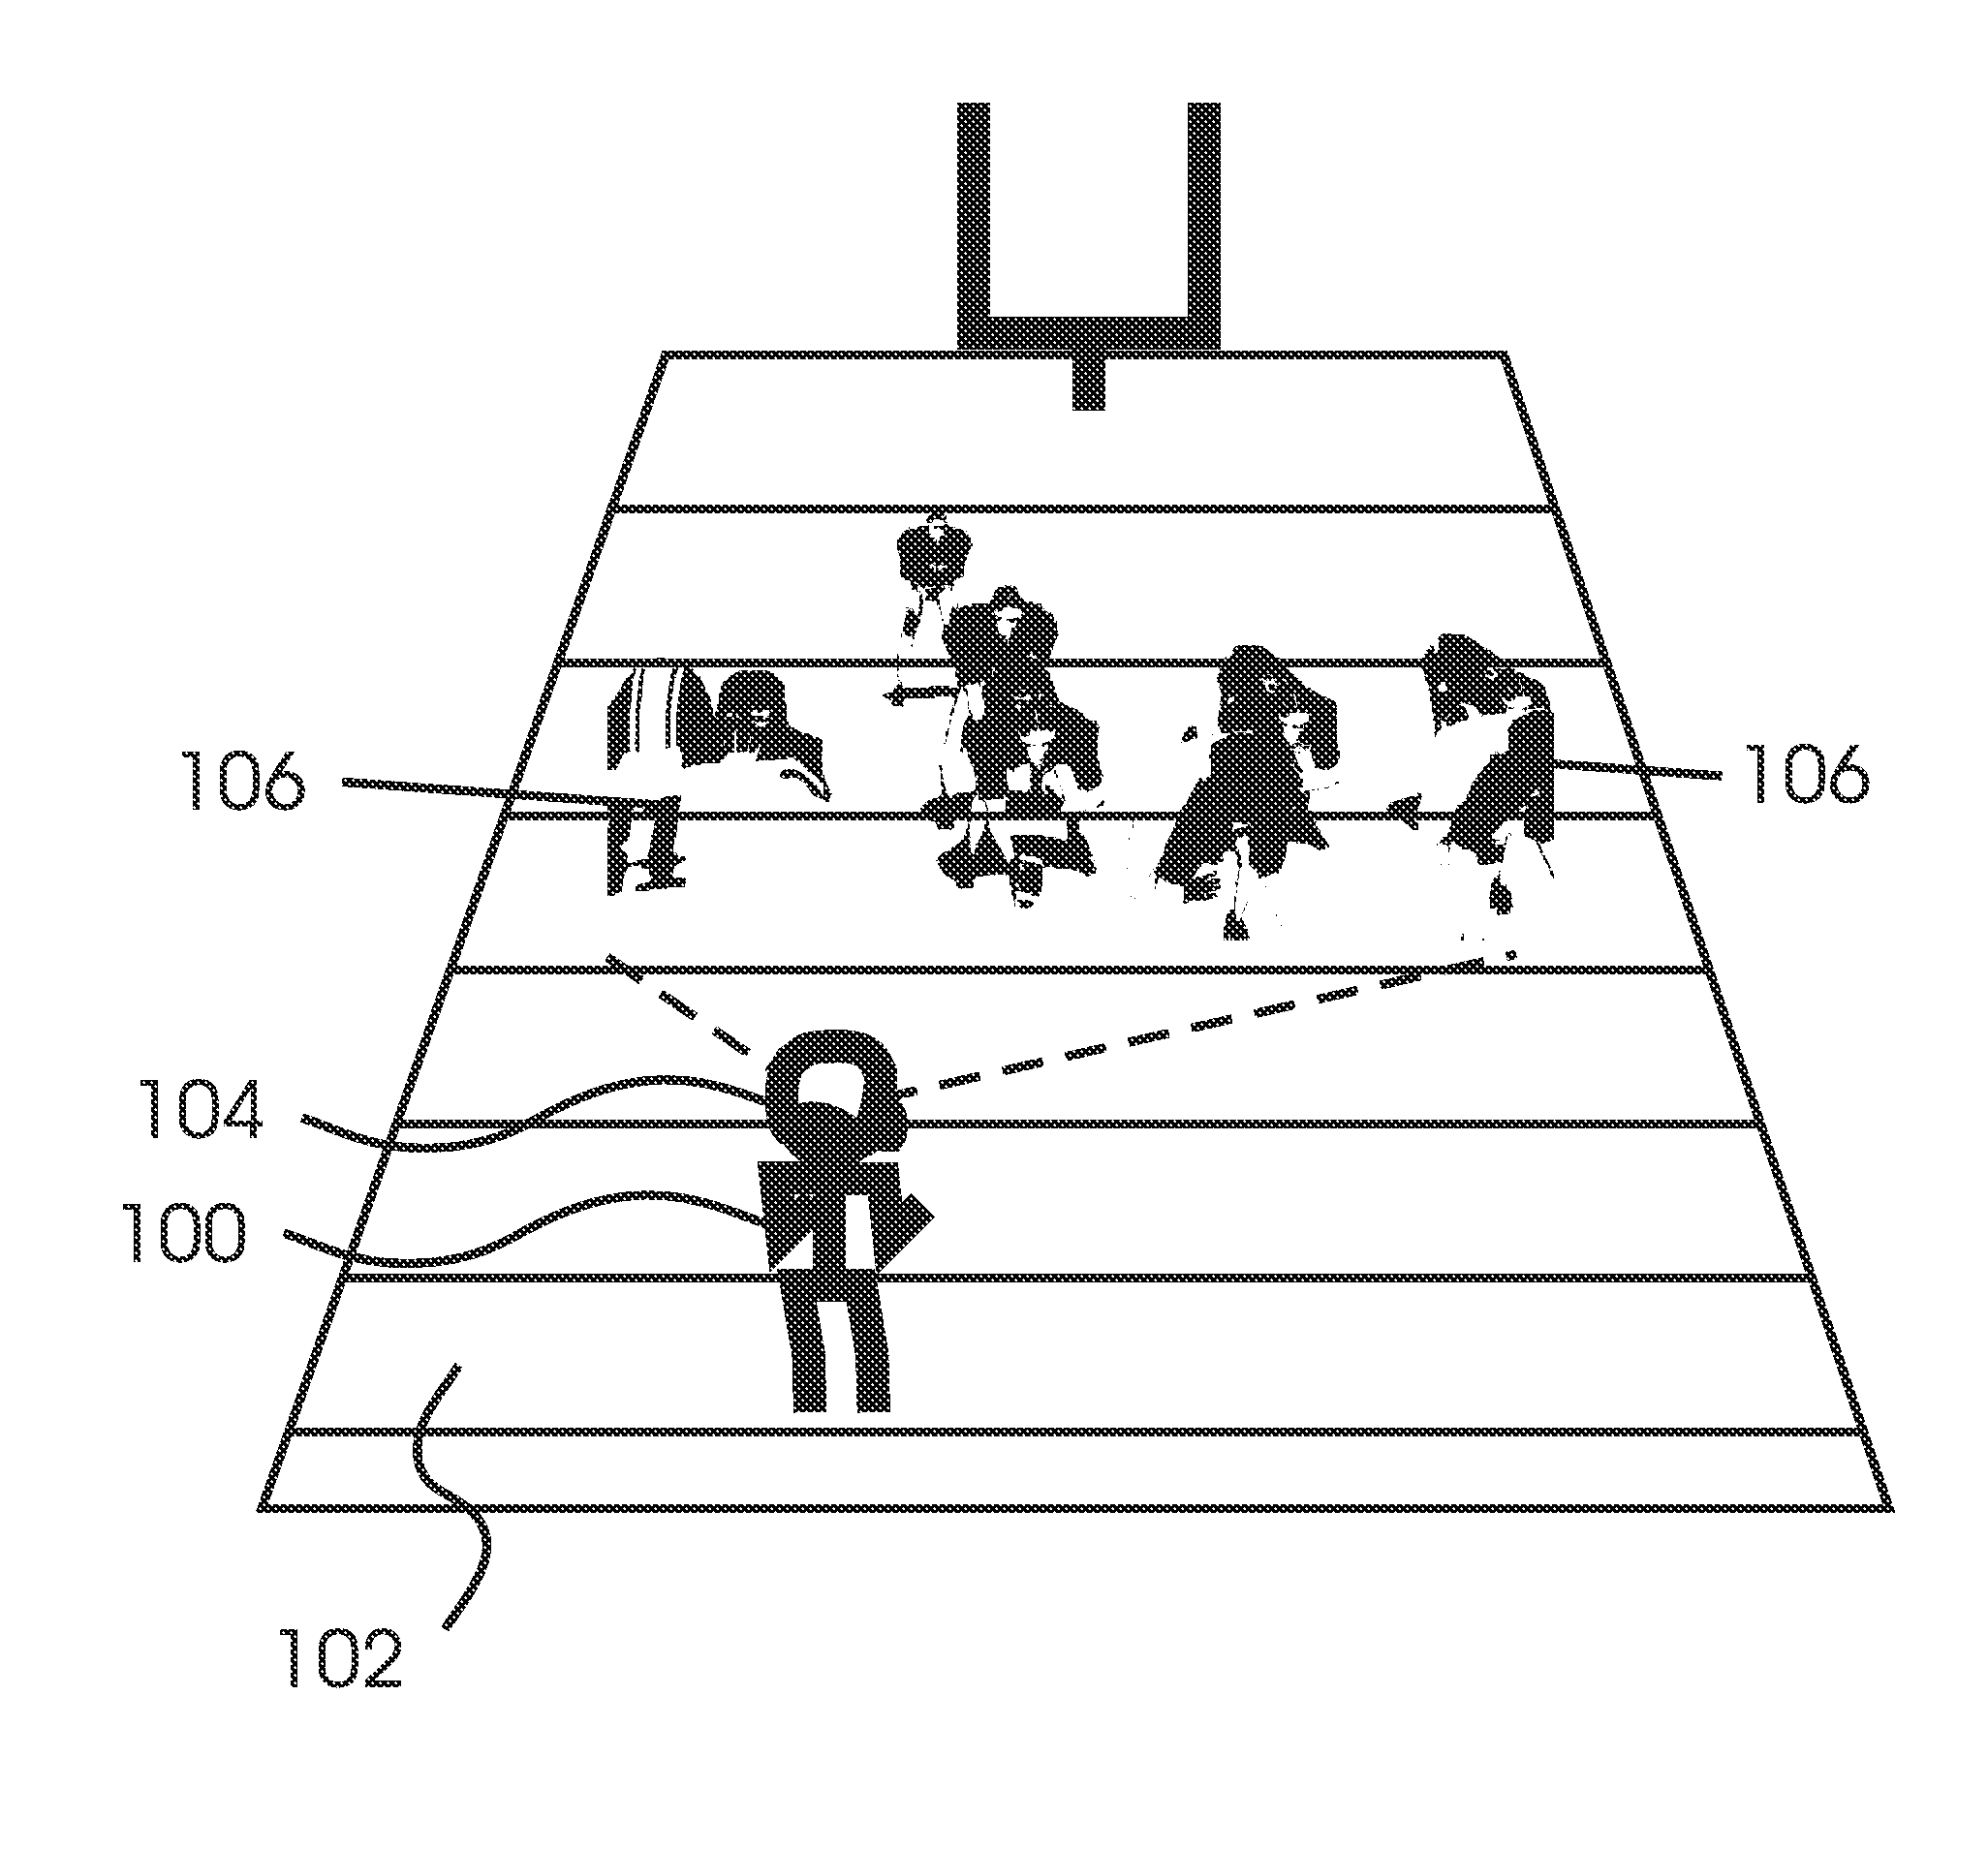 Apparatus and method for on-field virtual reality simulation of US football and other sports